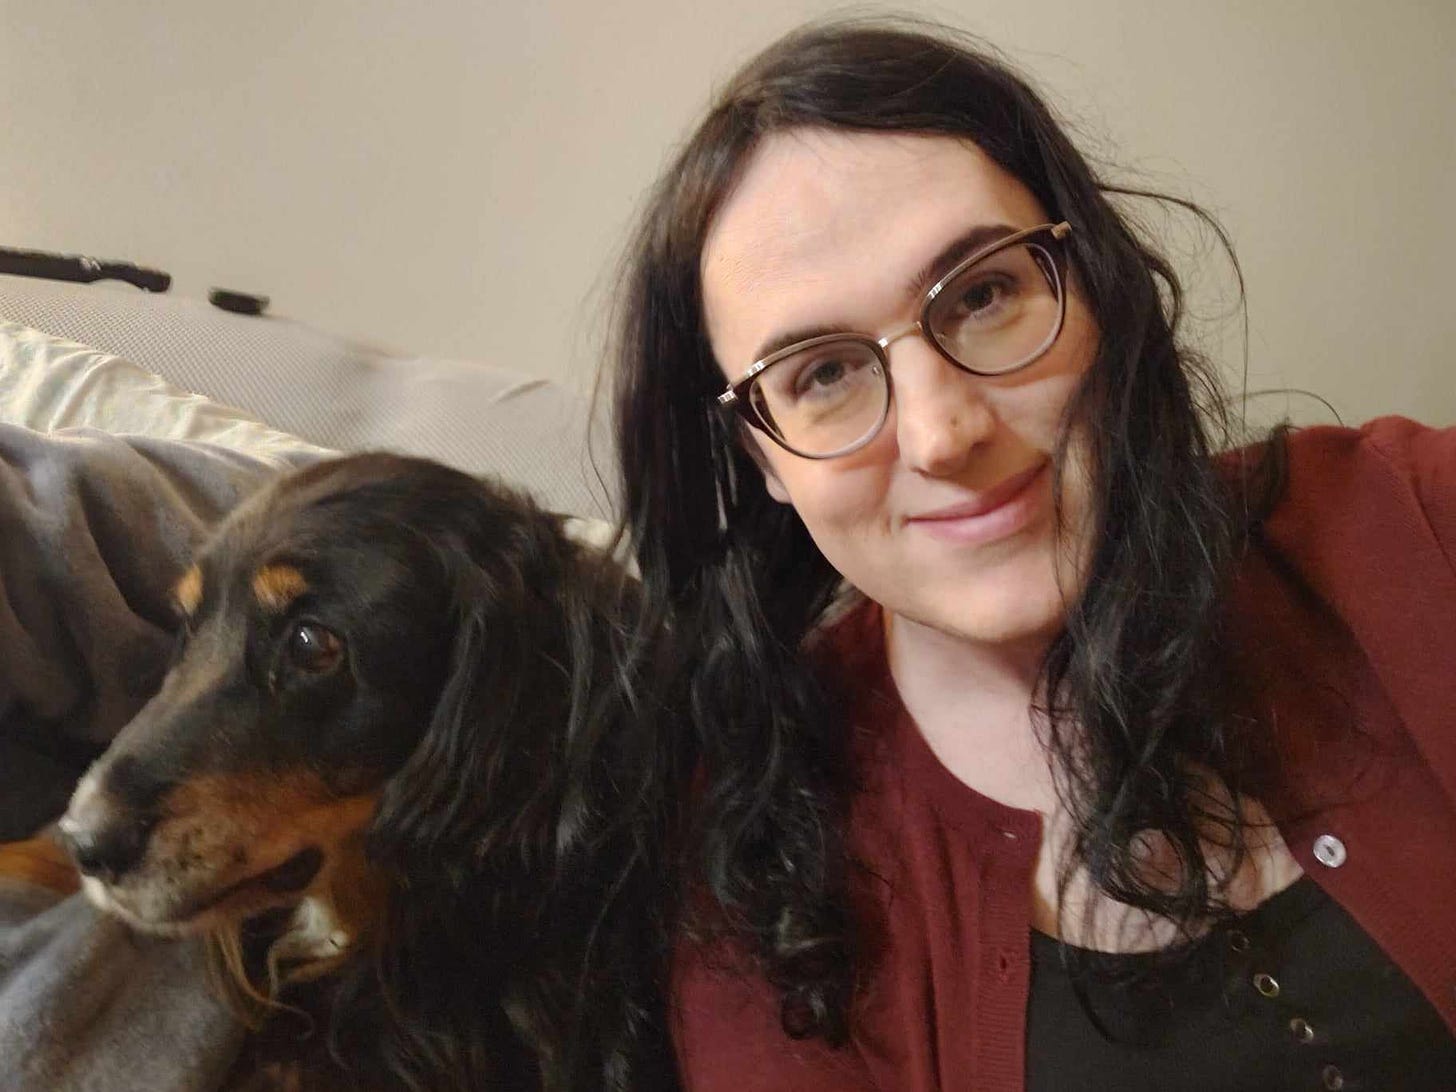 A photo of me, a pale white woman with black horned glasses and wavy black hair, looking exhausted, smiling slightly, next to a black and rust colored dog with wave fur down his ears